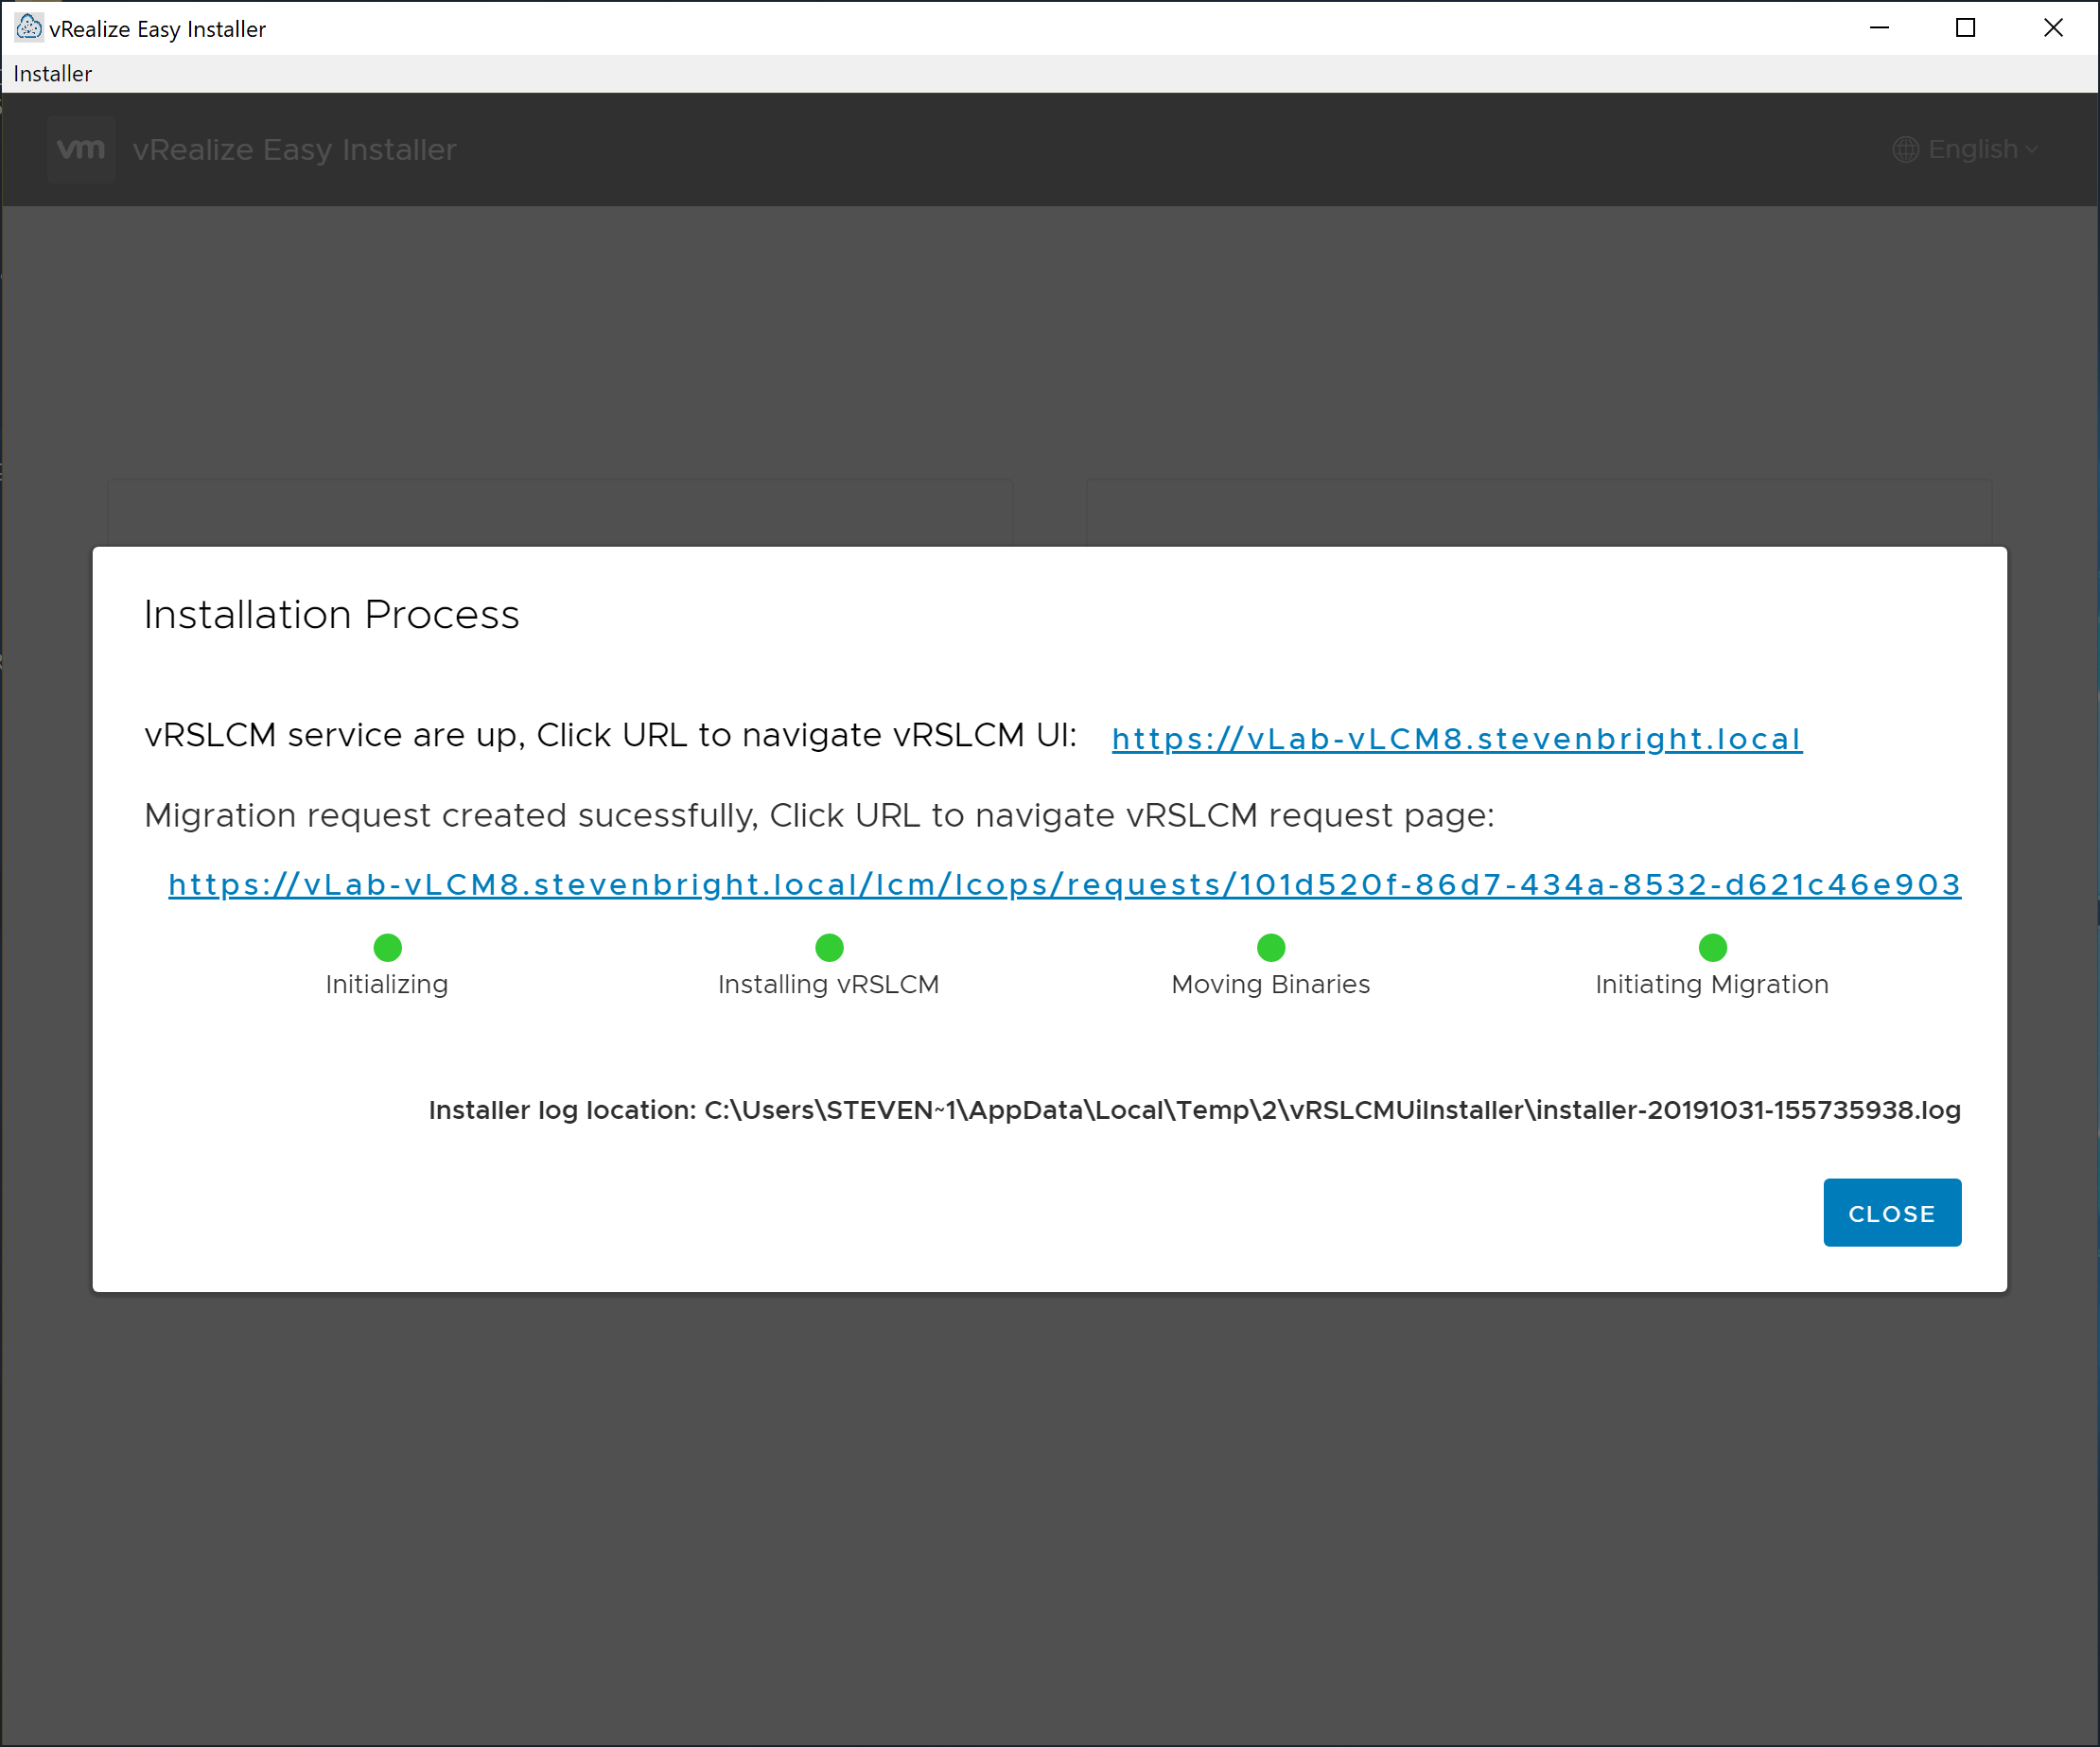 vRealize Easy Installer - Migrate - Installation Process - Complete